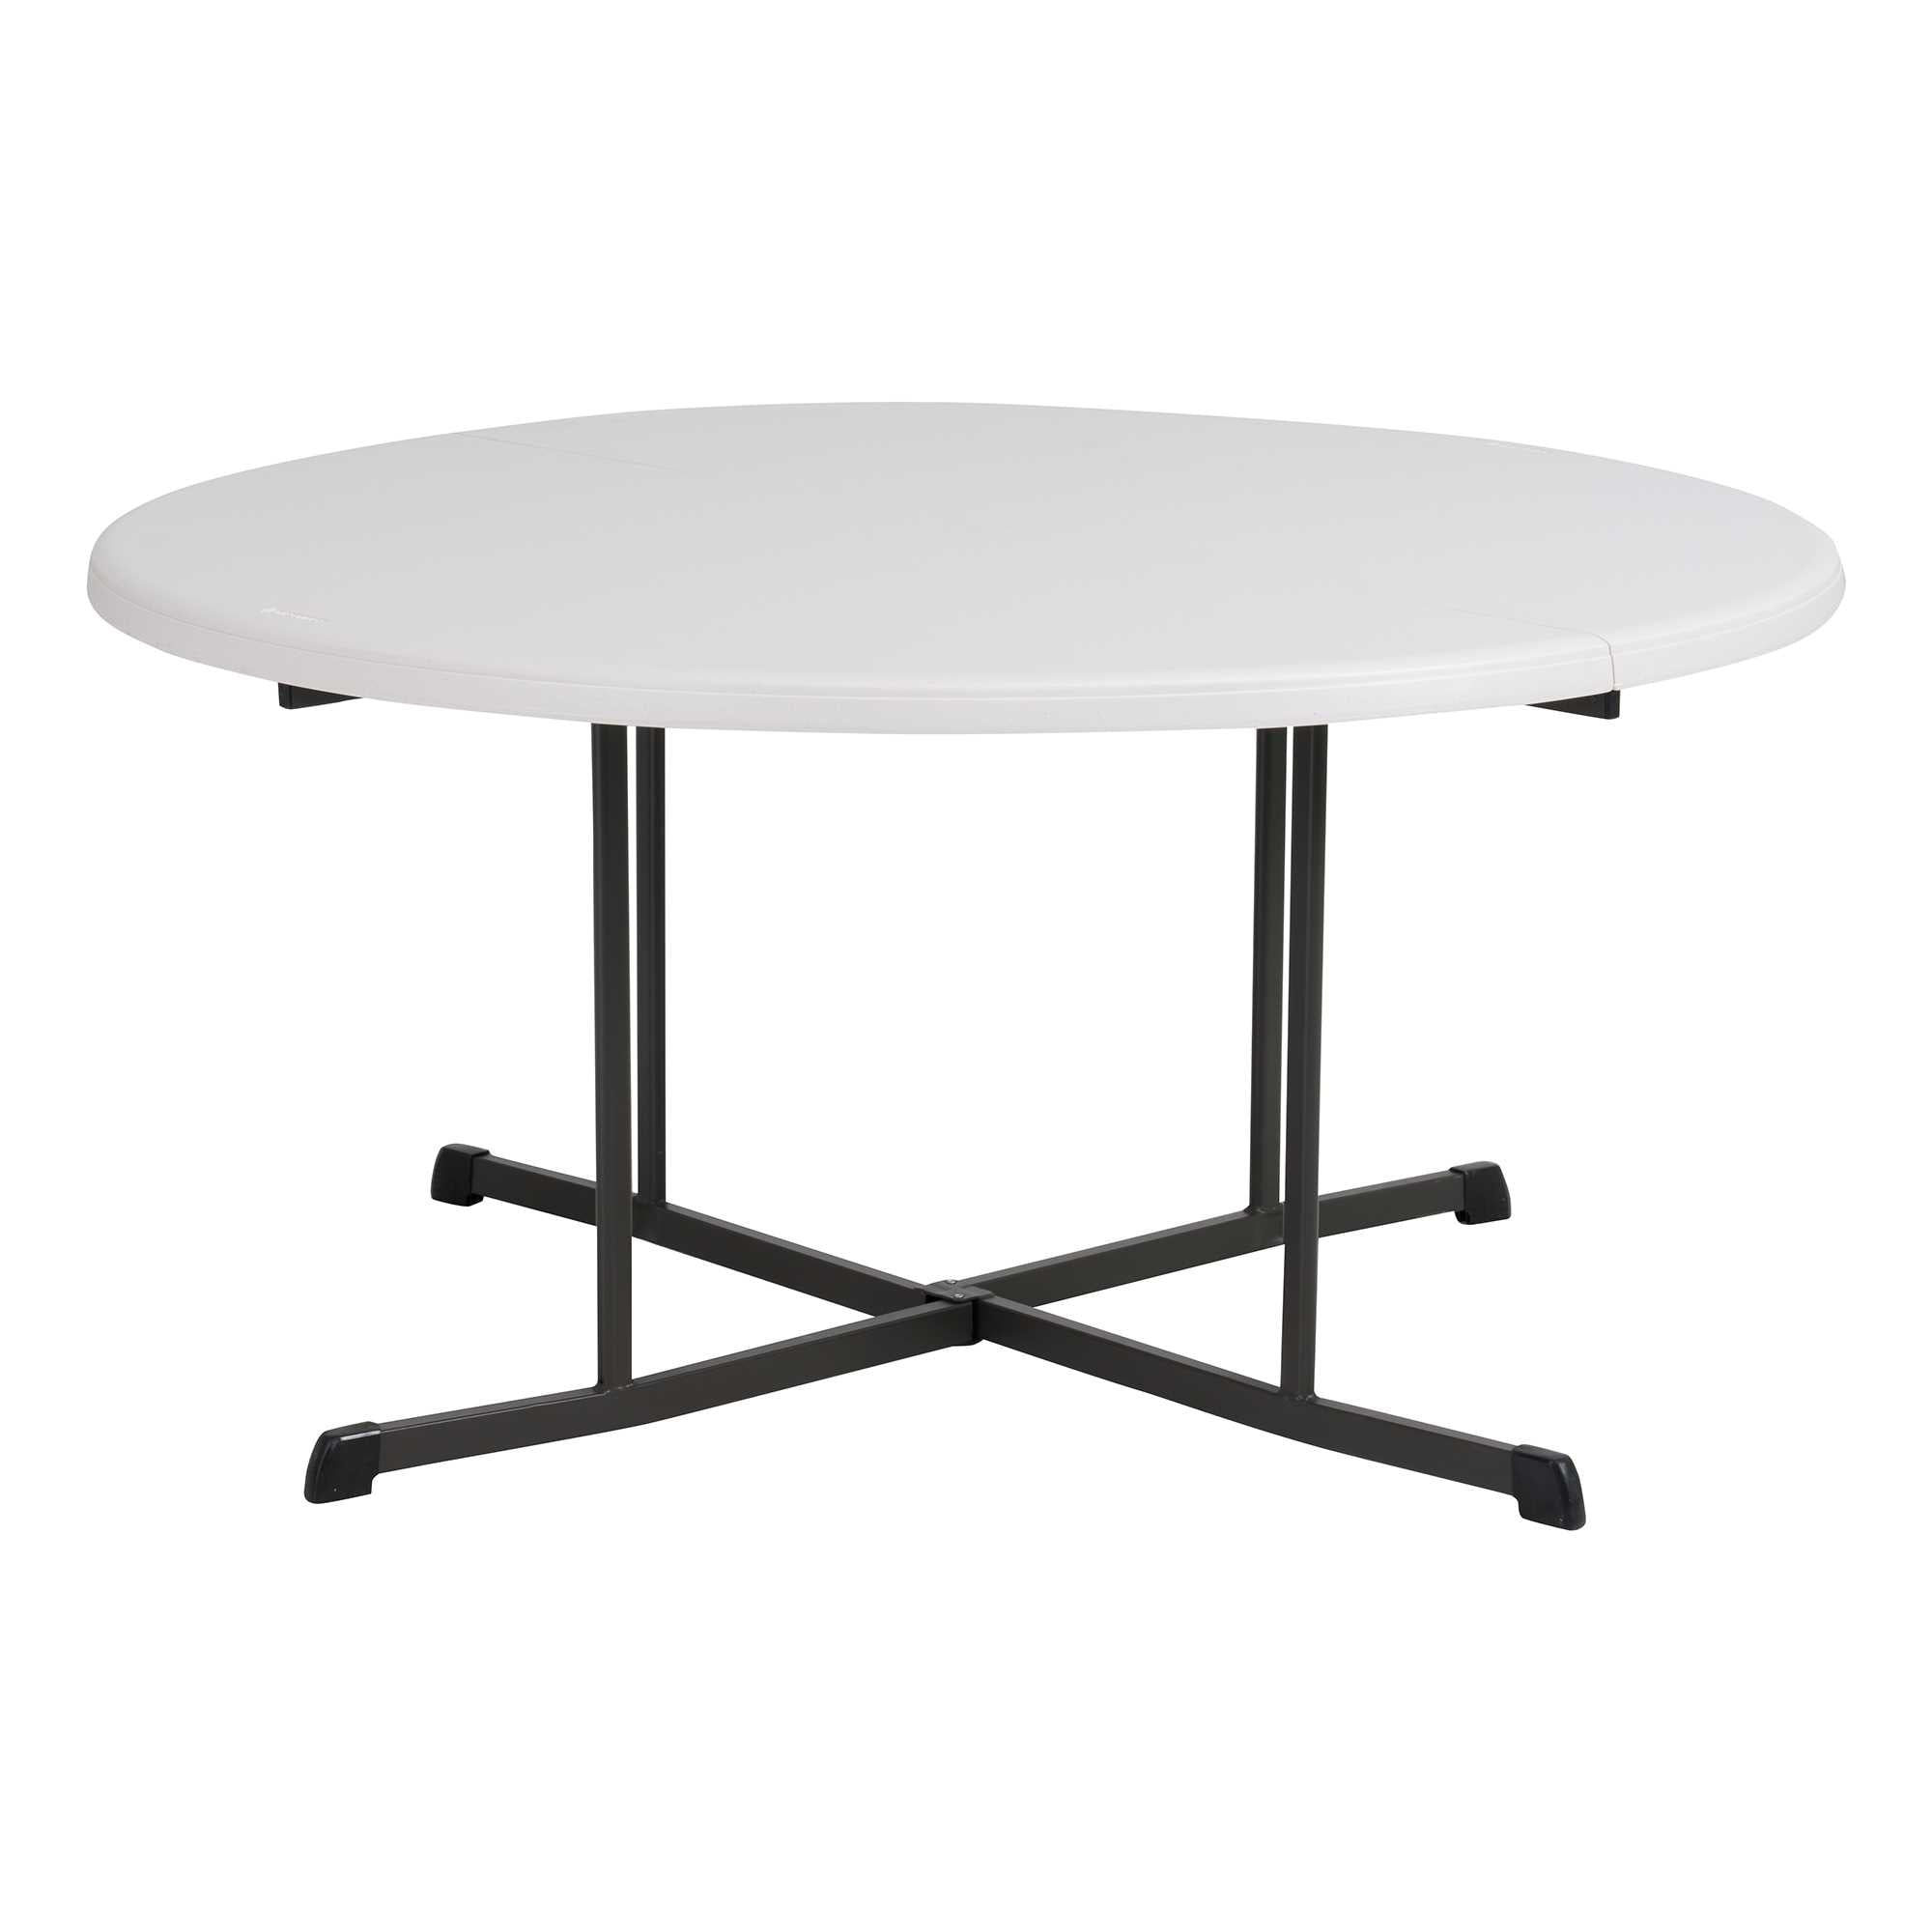 Lifetime 60 Inch Round Fold In Half, Lifetime 60 Inch Round Folding Tables